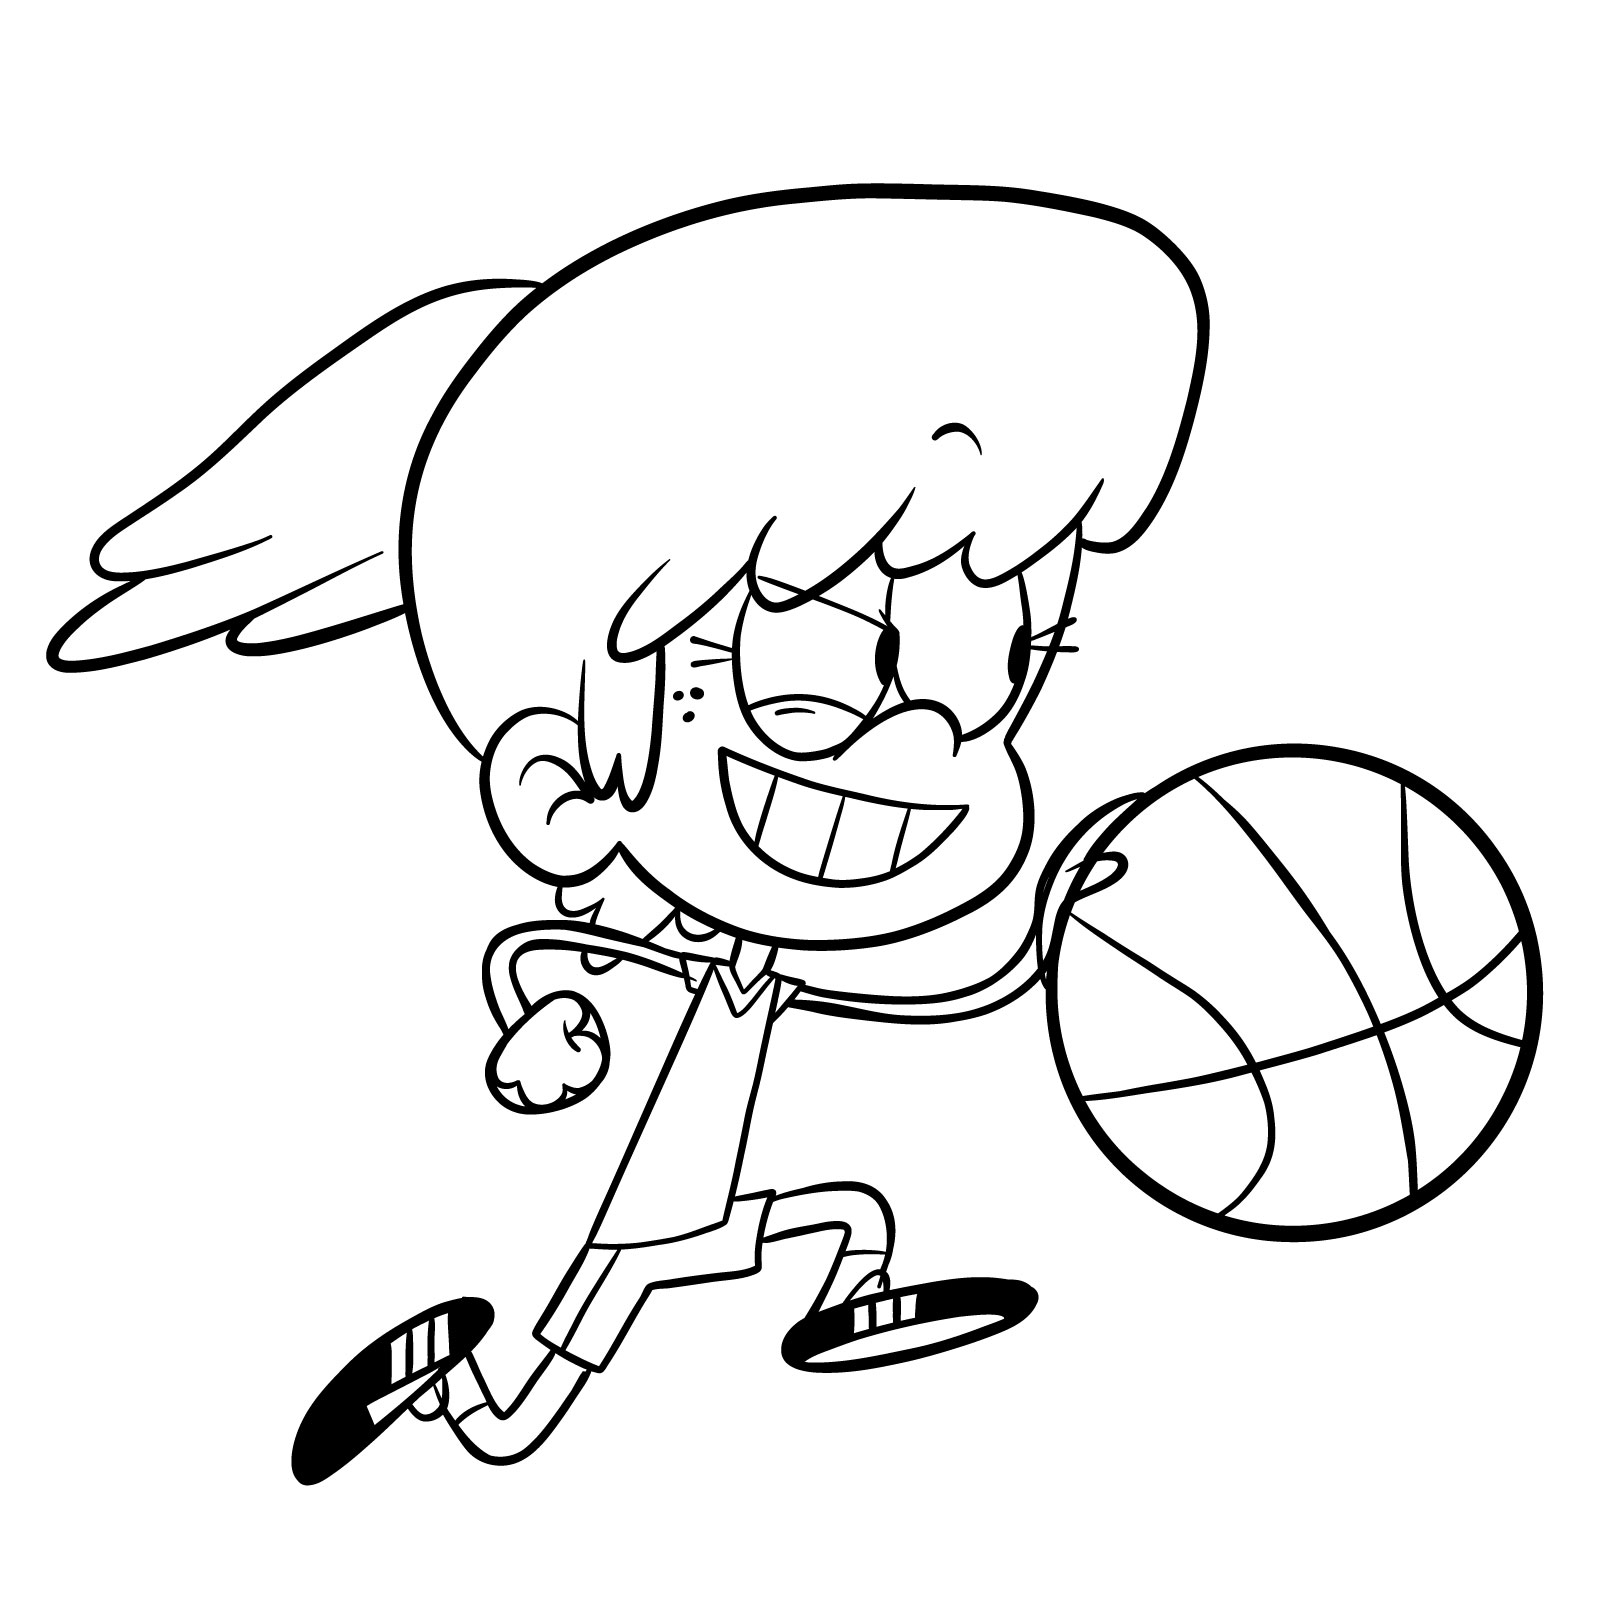 How to draw Lynn Loud playing backetball - final step